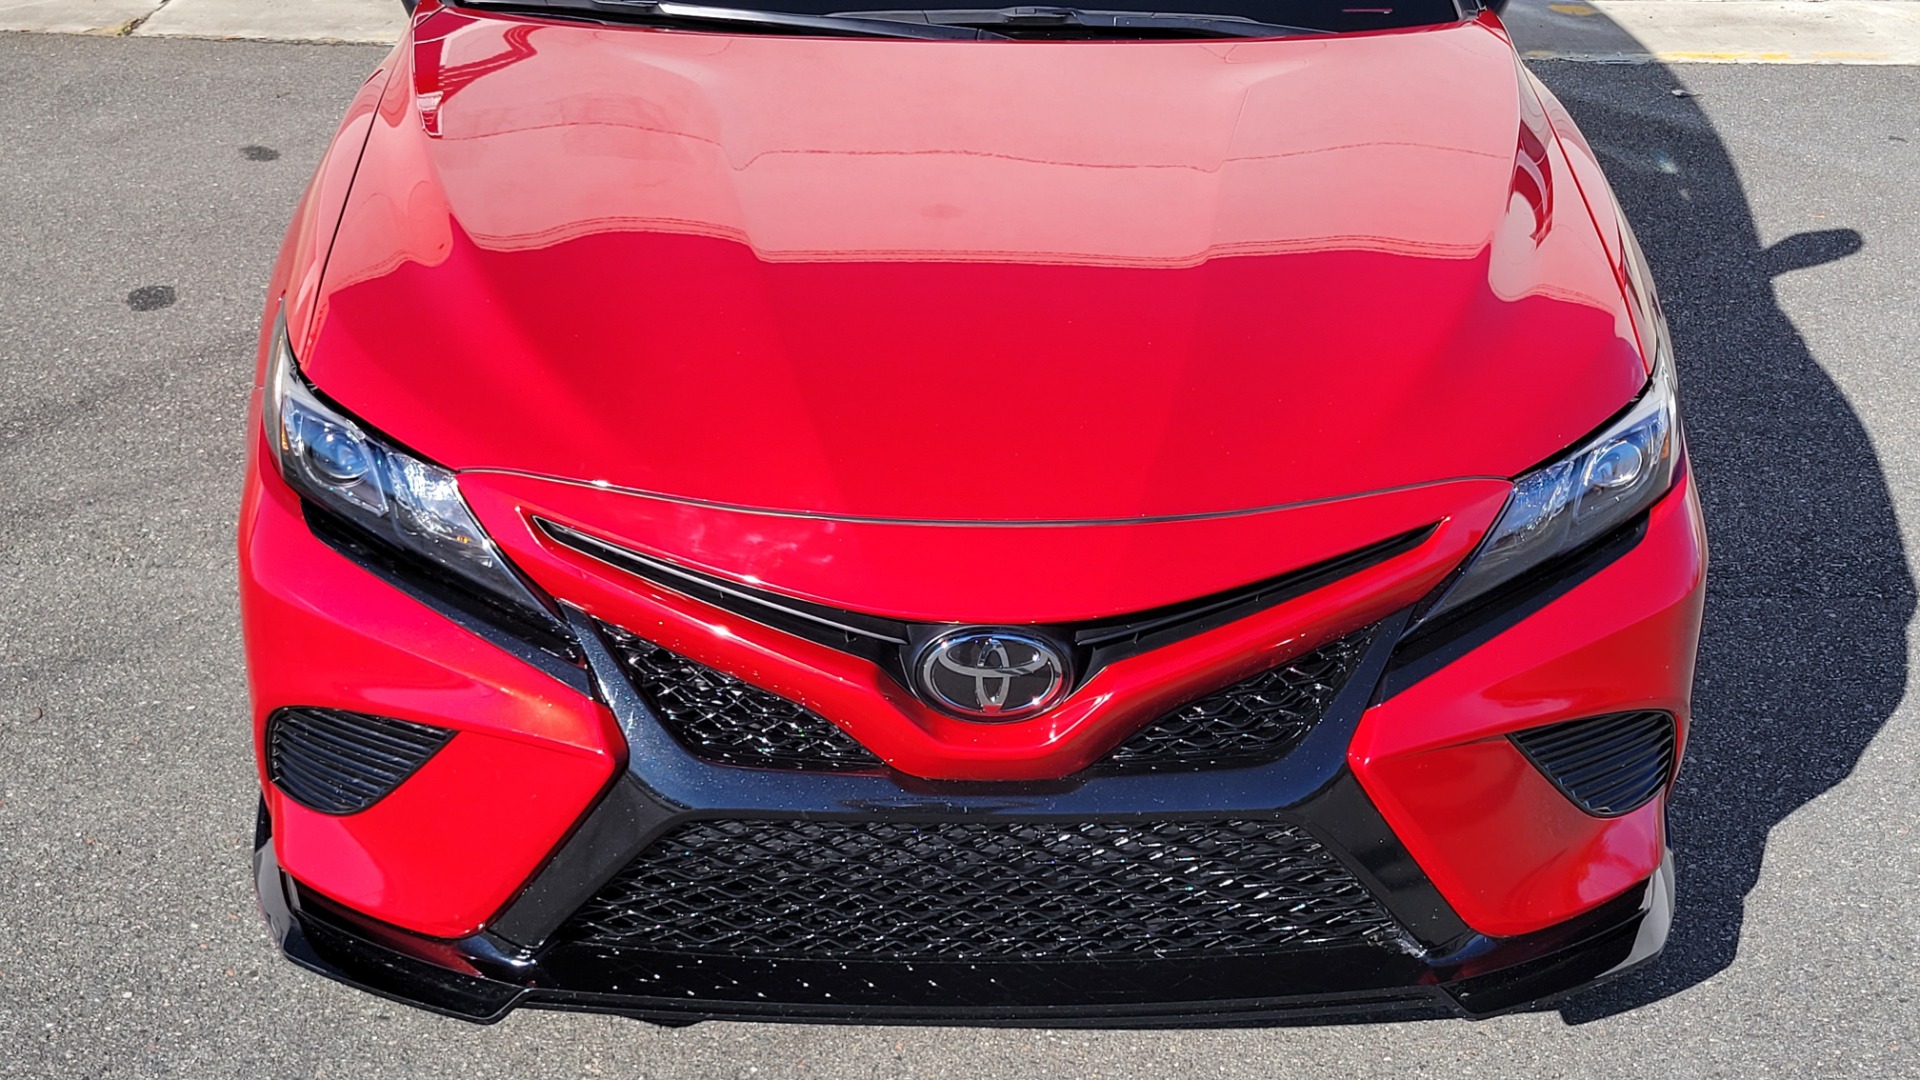 Used 2020 Toyota CAMRY TRD 3.5L V6 SEDAN / 8-SPEED AUTO / CLOTH SEATS / REARVIEW for sale $35,995 at Formula Imports in Charlotte NC 28227 27